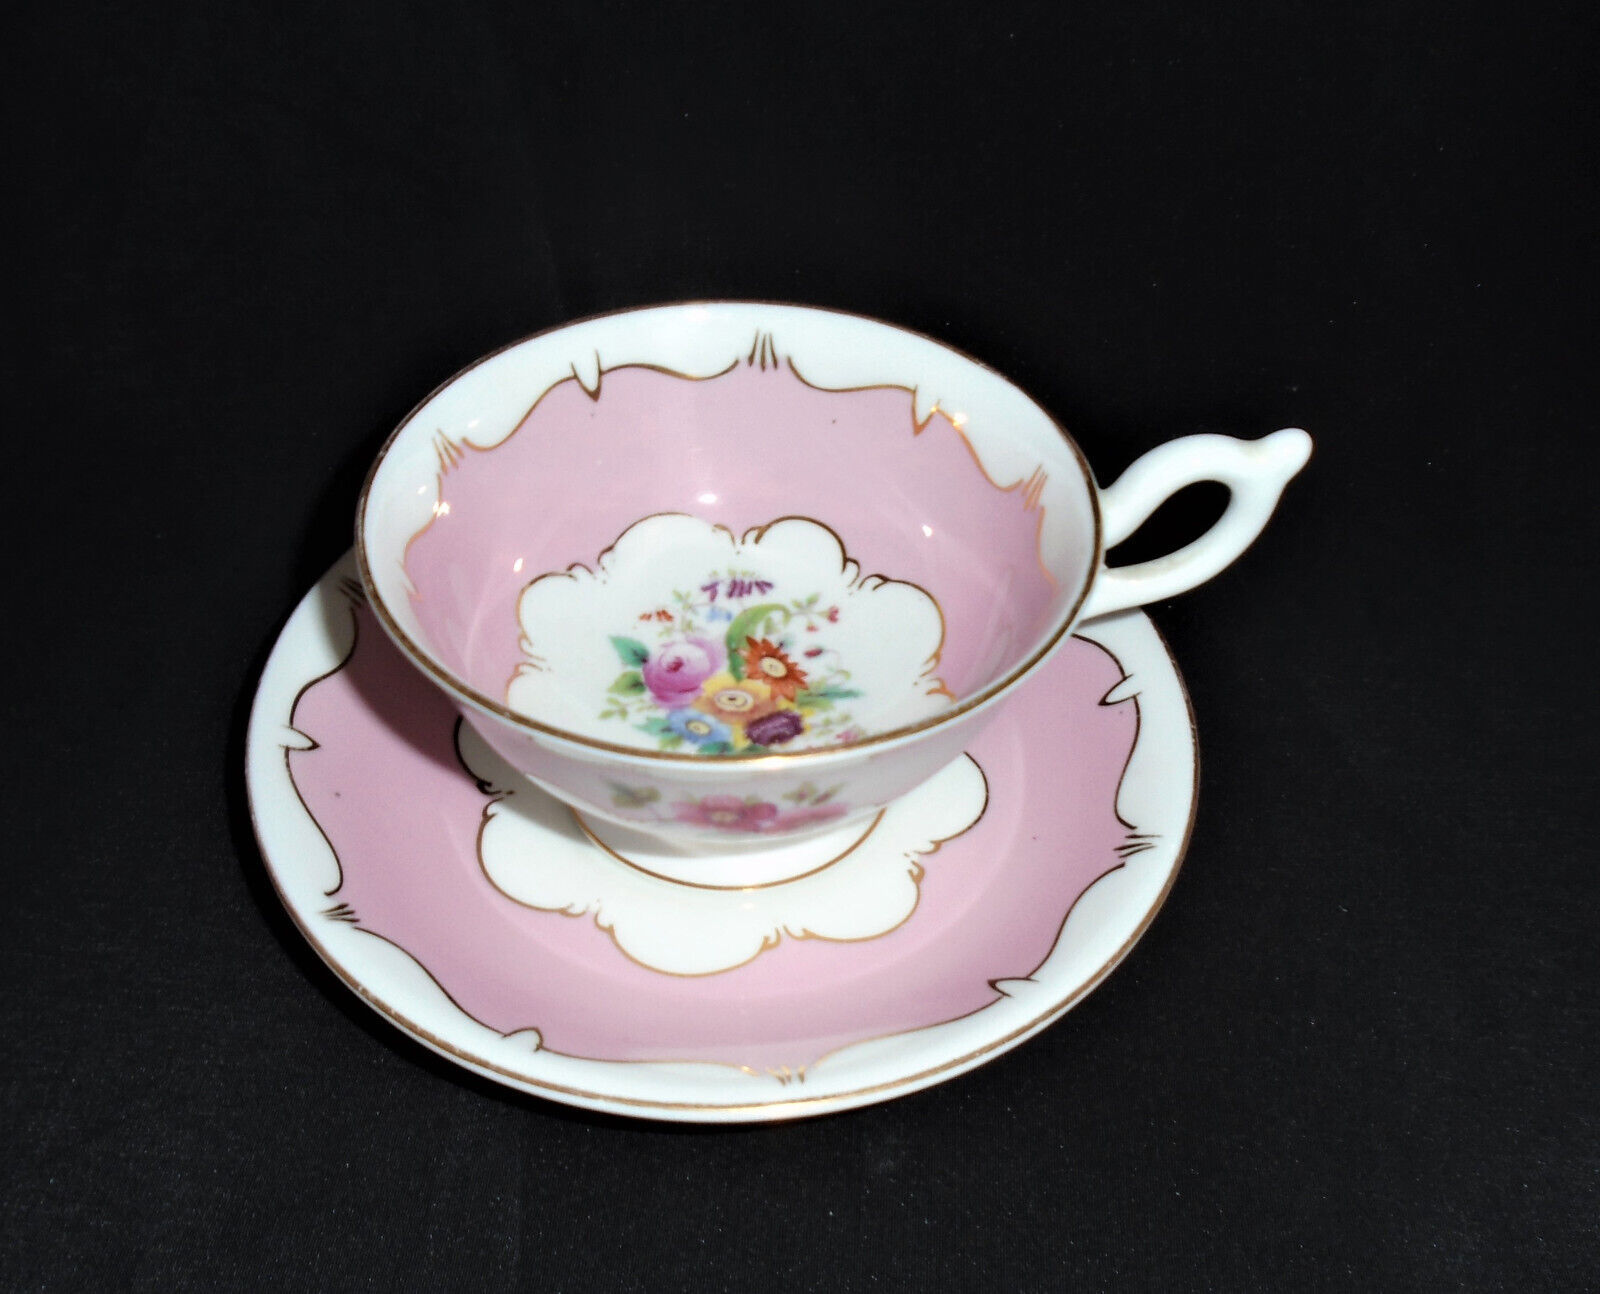 Primary image for Coalport Teacup and Saucer Vintage Bone China England Pink With Flowers